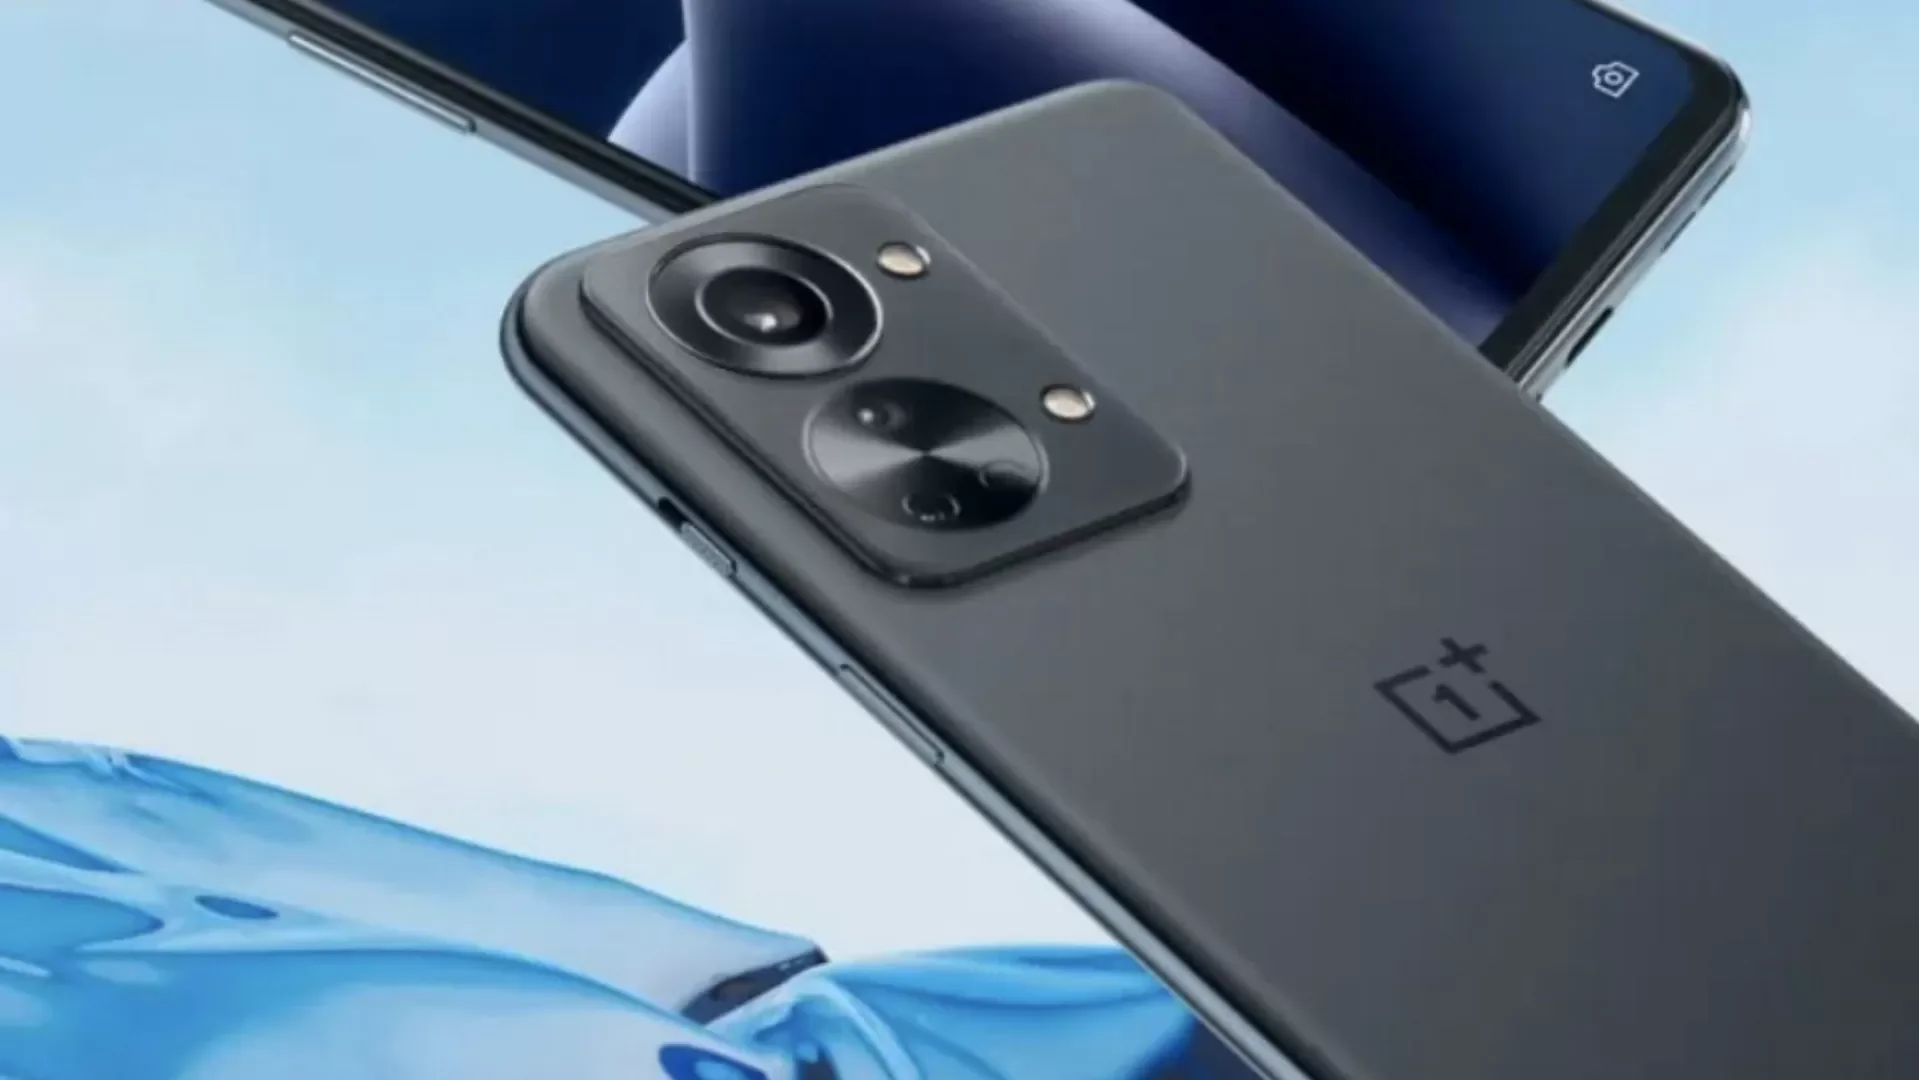 OnePlus will remove its distinctive feature from new smartphones